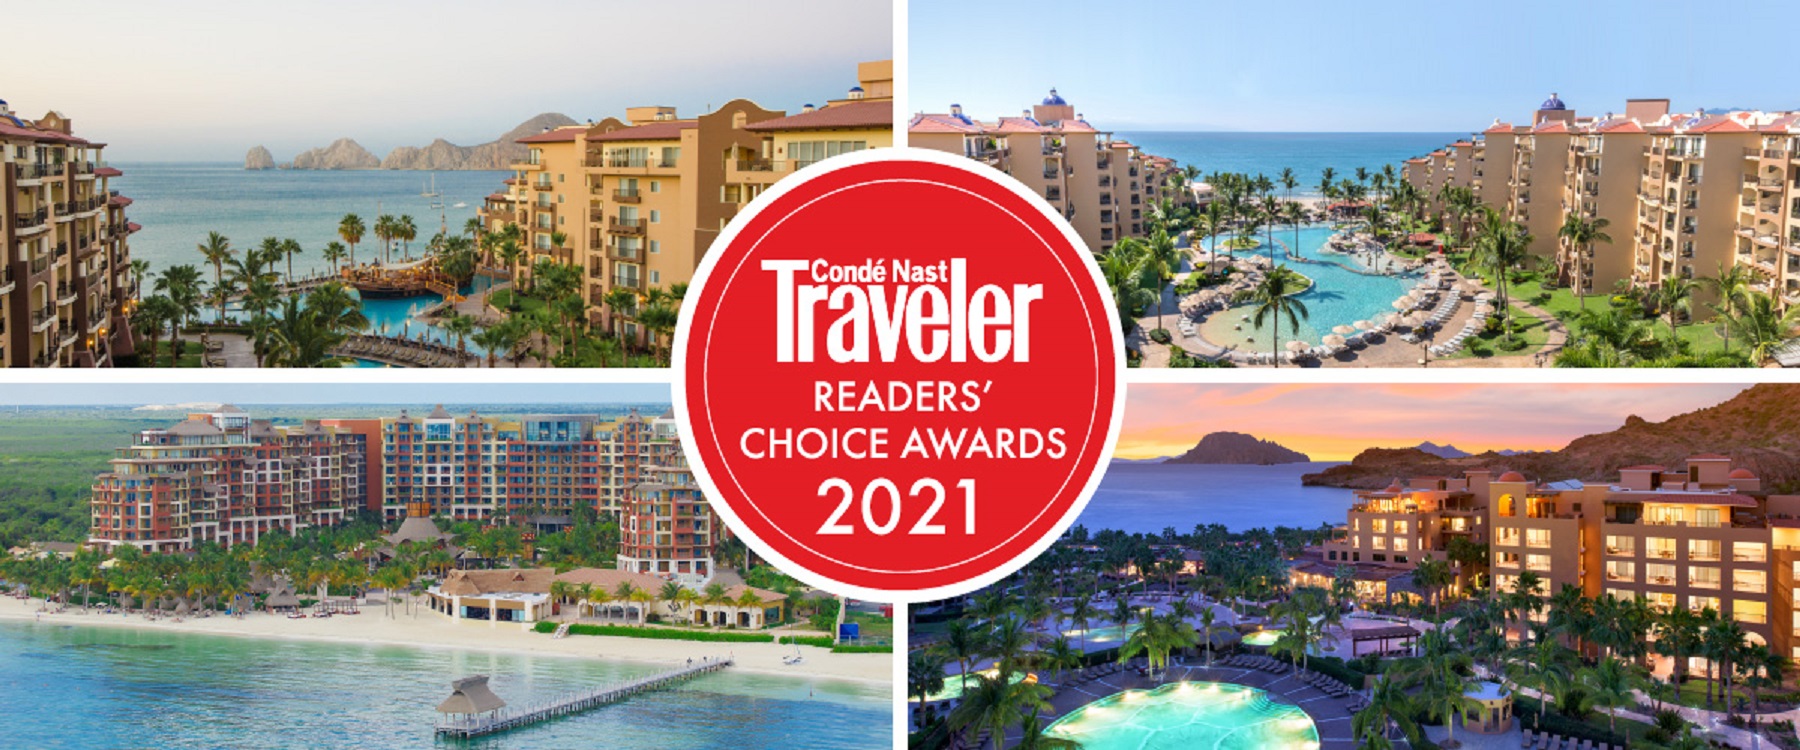 Our Resorts Have Been Nominated for the Conde Nast Traveler 2021 Reader’s Choice Awards